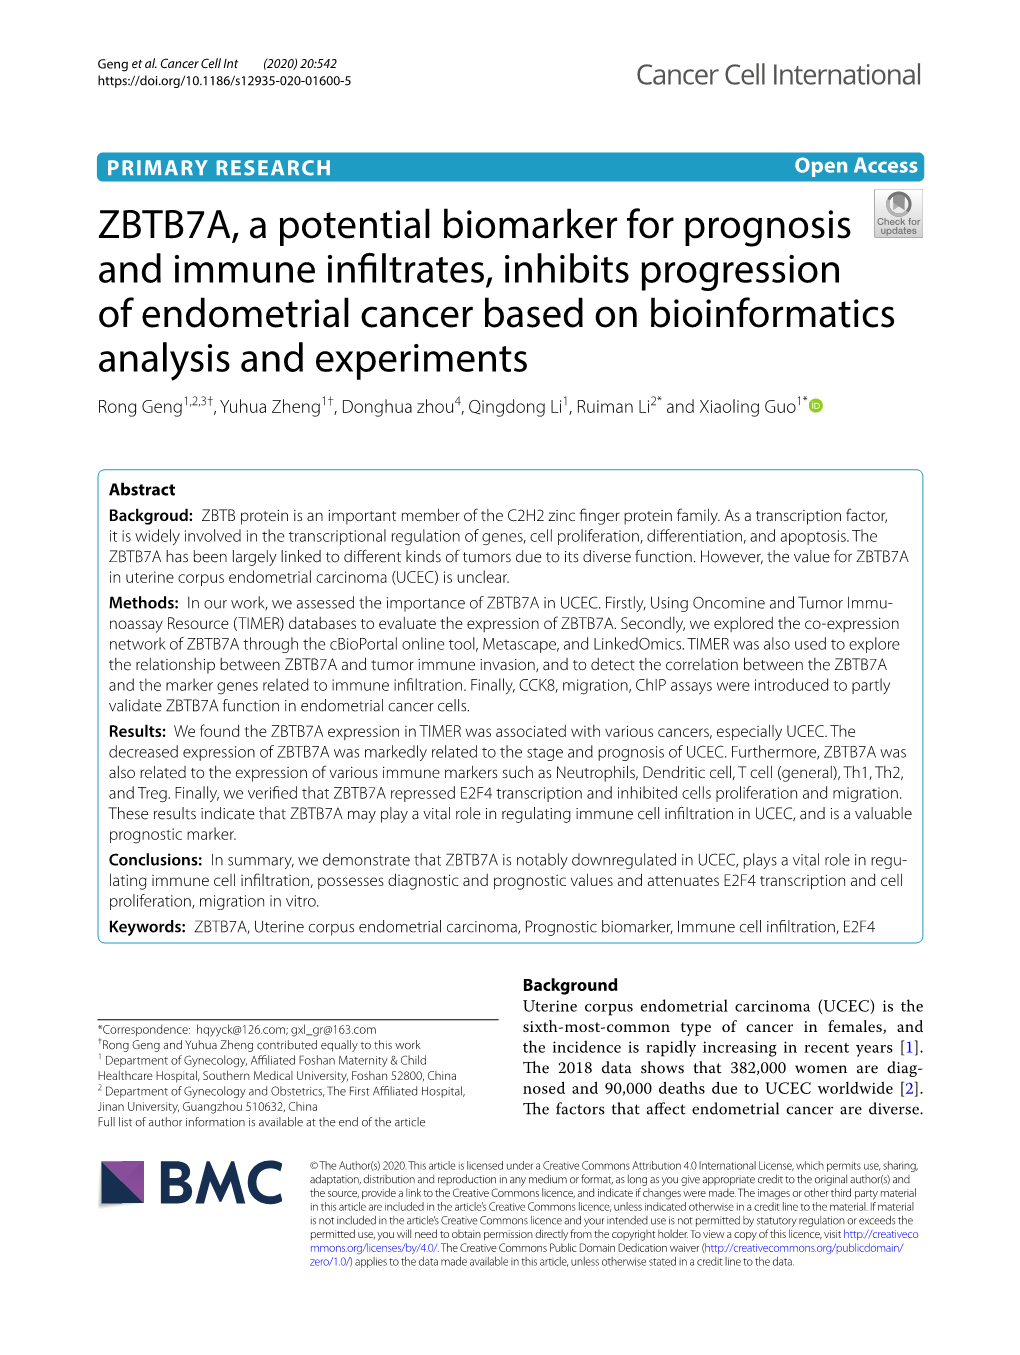 ZBTB7A, a Potential Biomarker for Prognosis and Immune Infiltrates